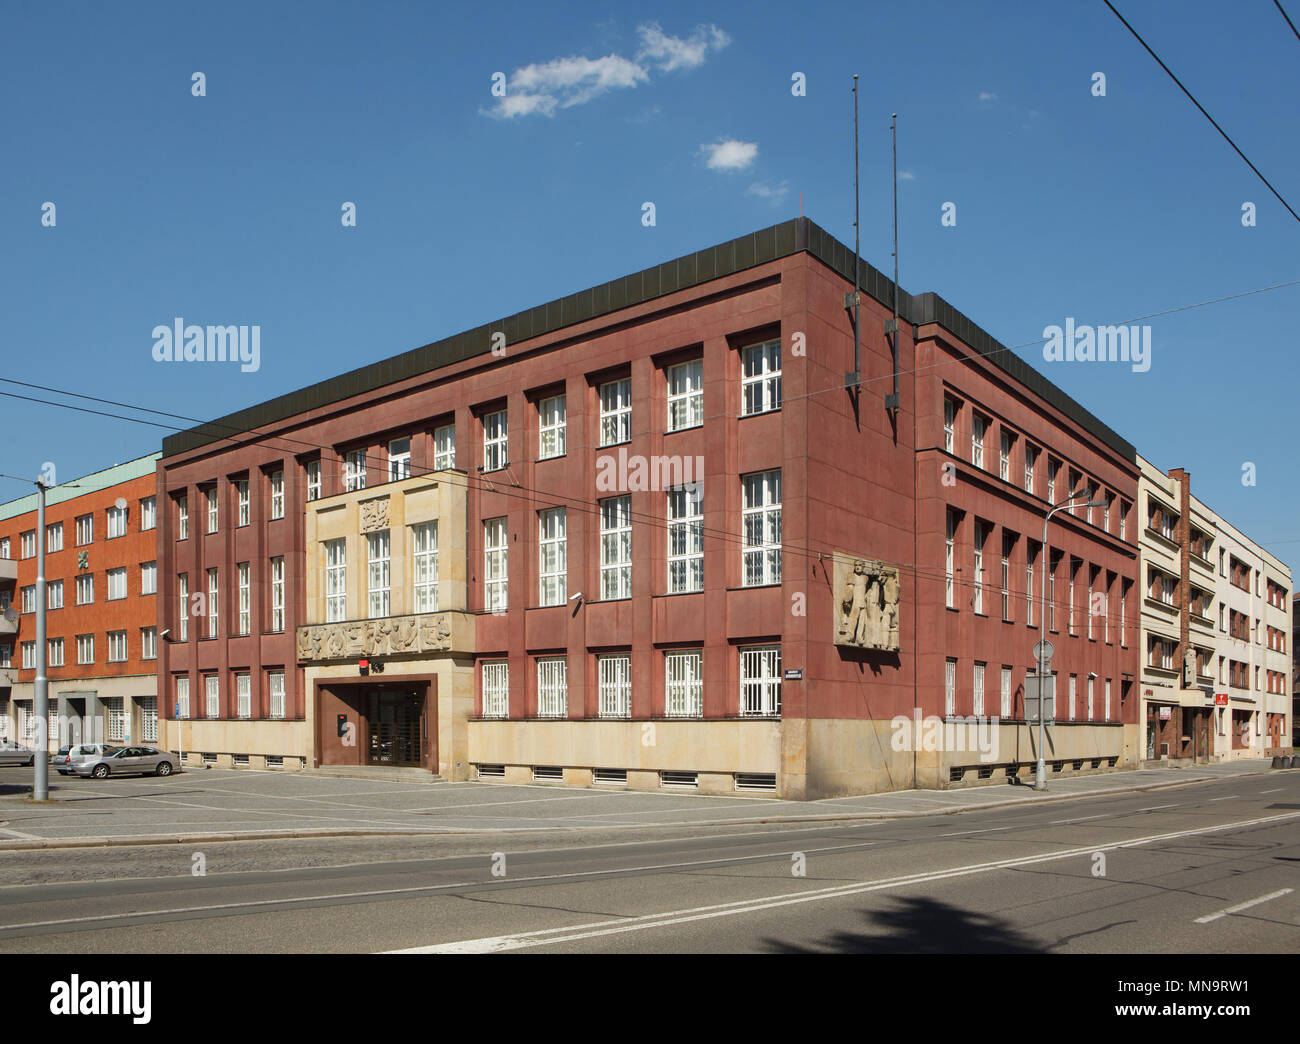 Czechoslovakia 1932 High Resolution Stock Photography and Images - Alamy